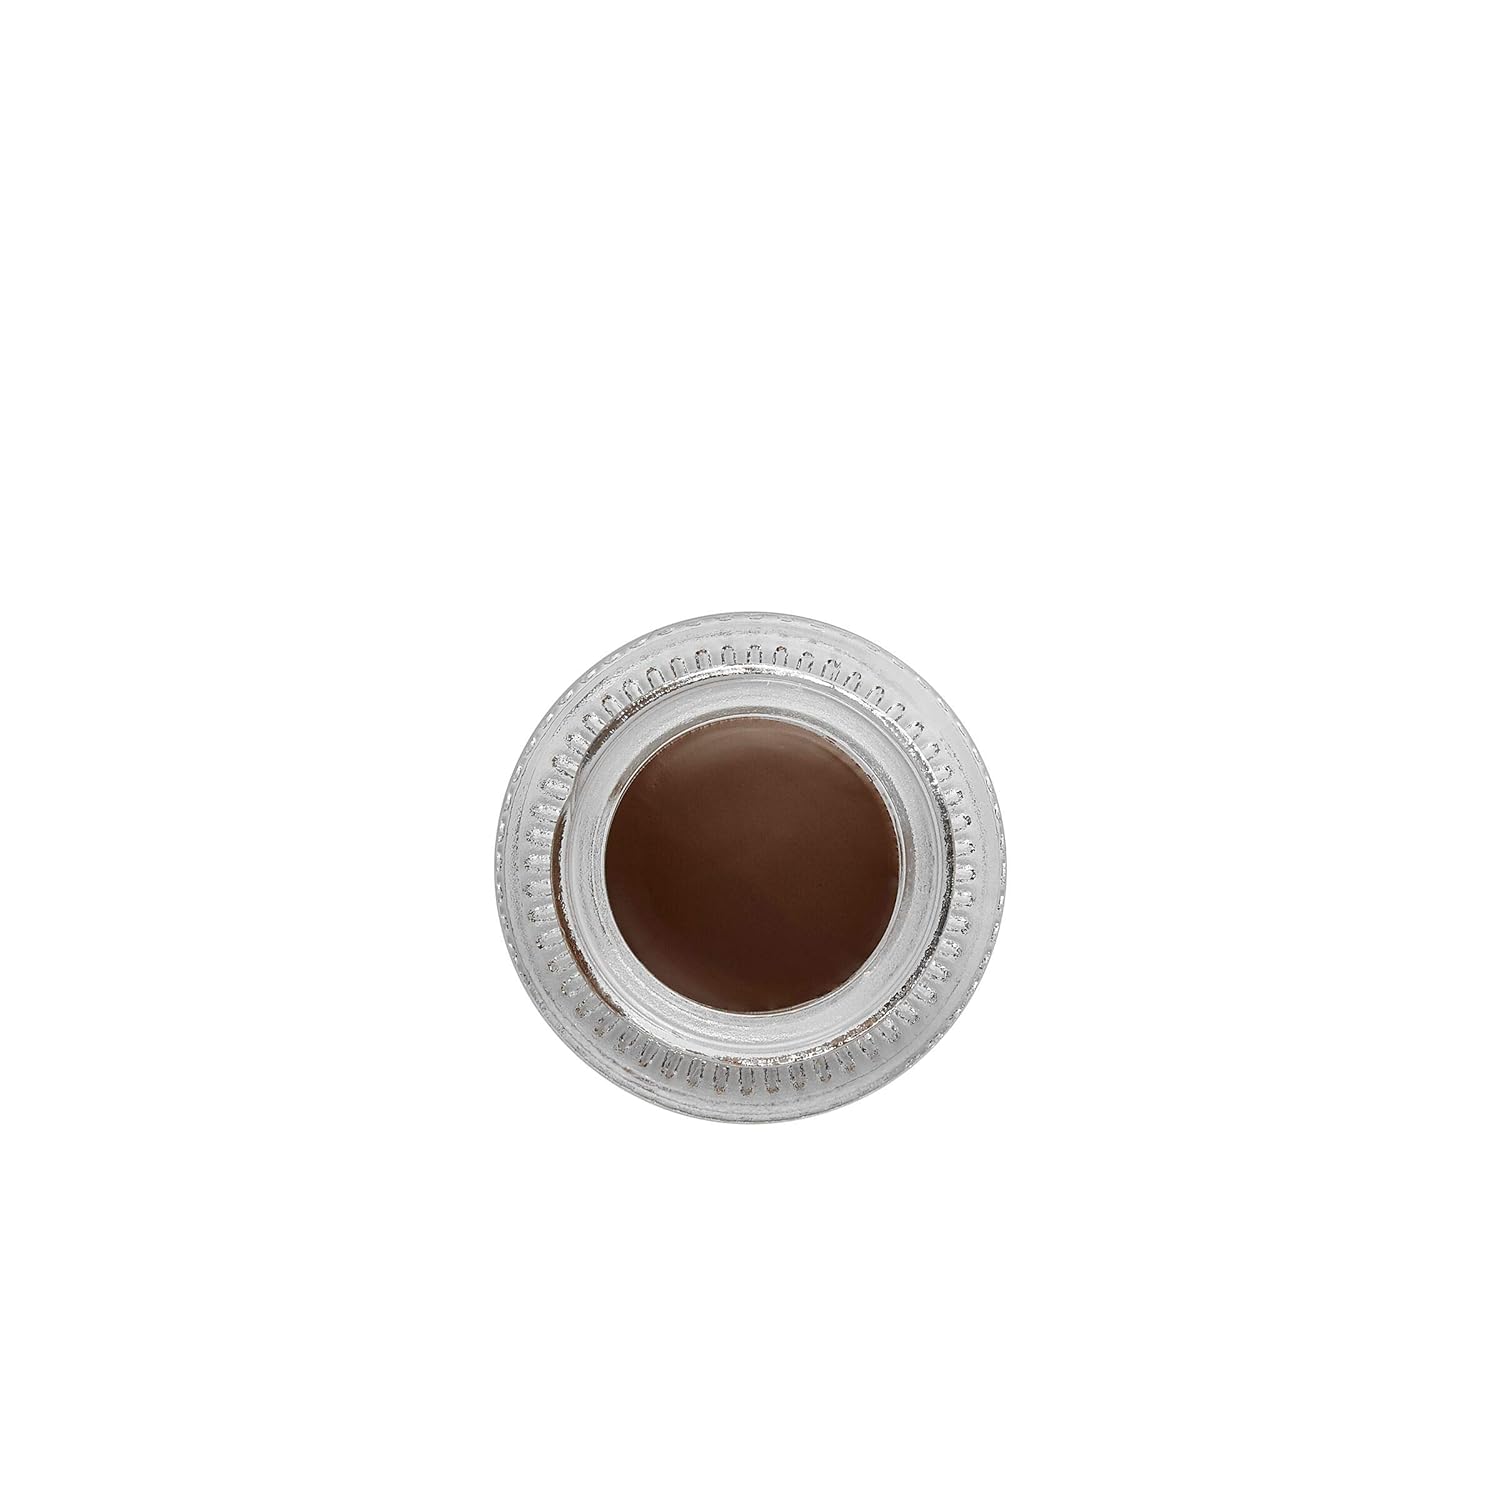 Sigma Beauty DEFINE + POSE Brow Pomade - Rich and Creamy Eyebrow Pomade - Define and Fill Brows - Water Resistant, Smudge Resistant Brow Pomade - Medium